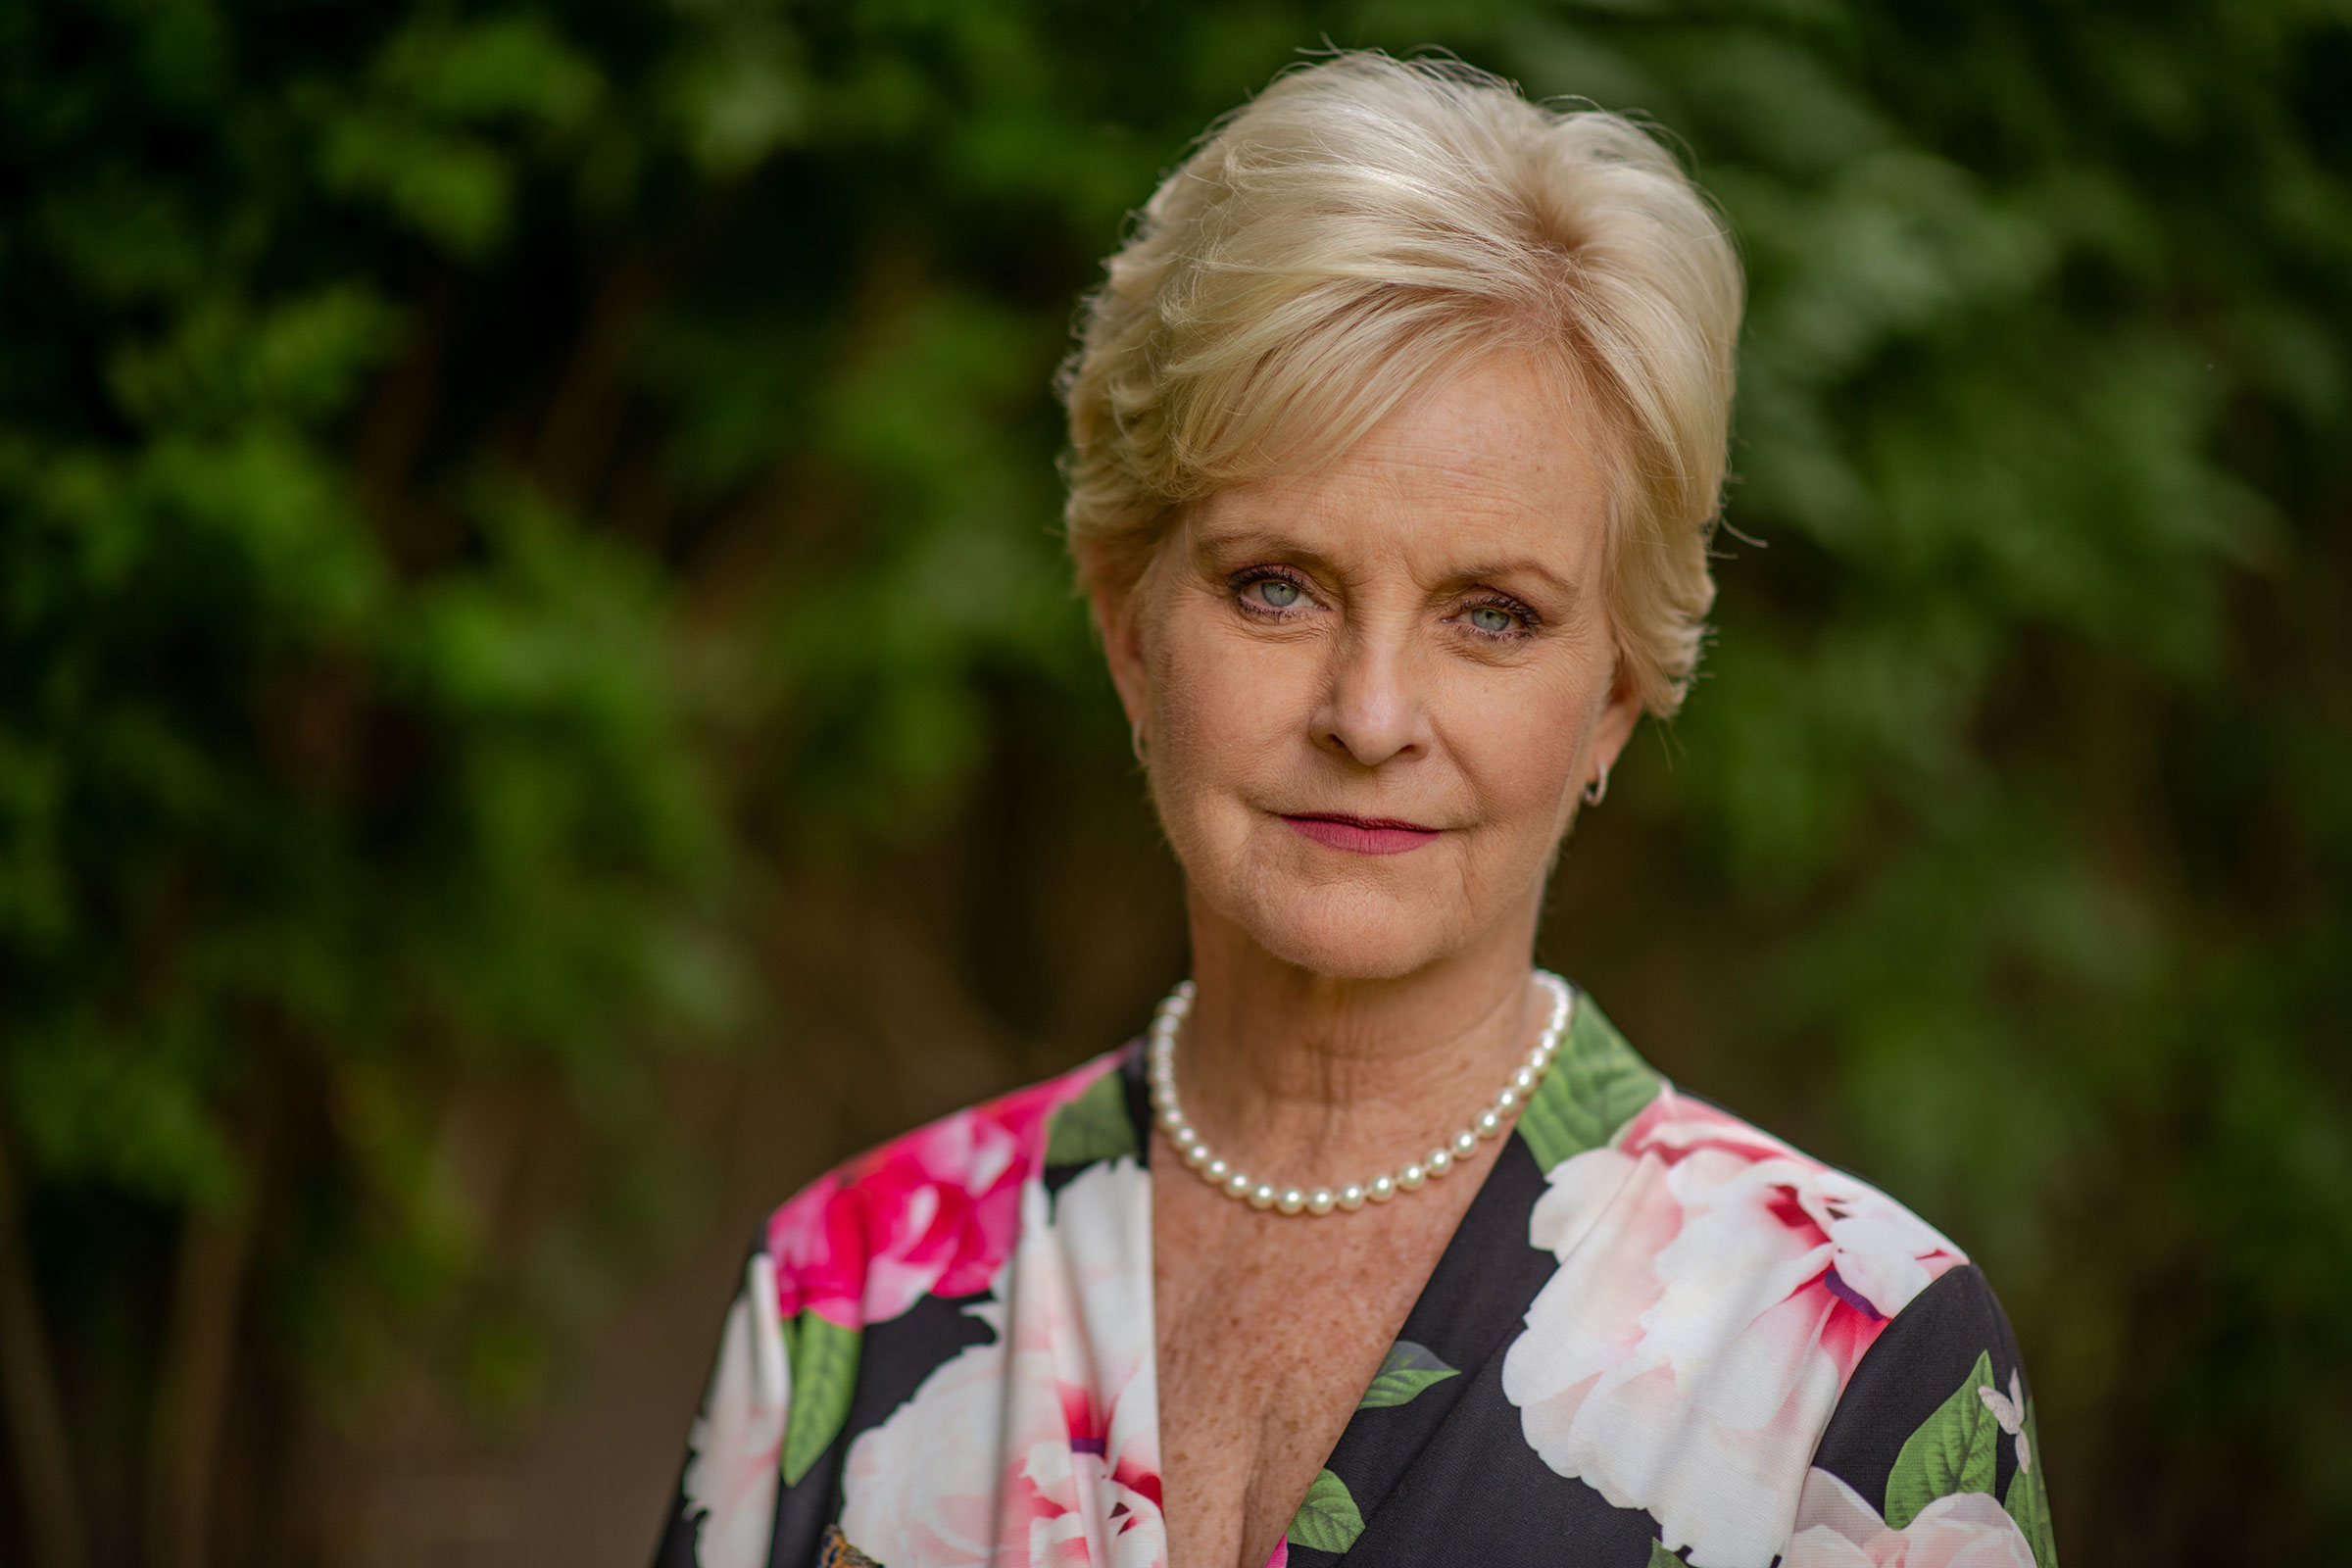 Cindy McCain poses for a portrait at her home in Phoenix, Ariz. on April 29, 2019. (Dominic Valente—The Washington Post/ Getty Images)